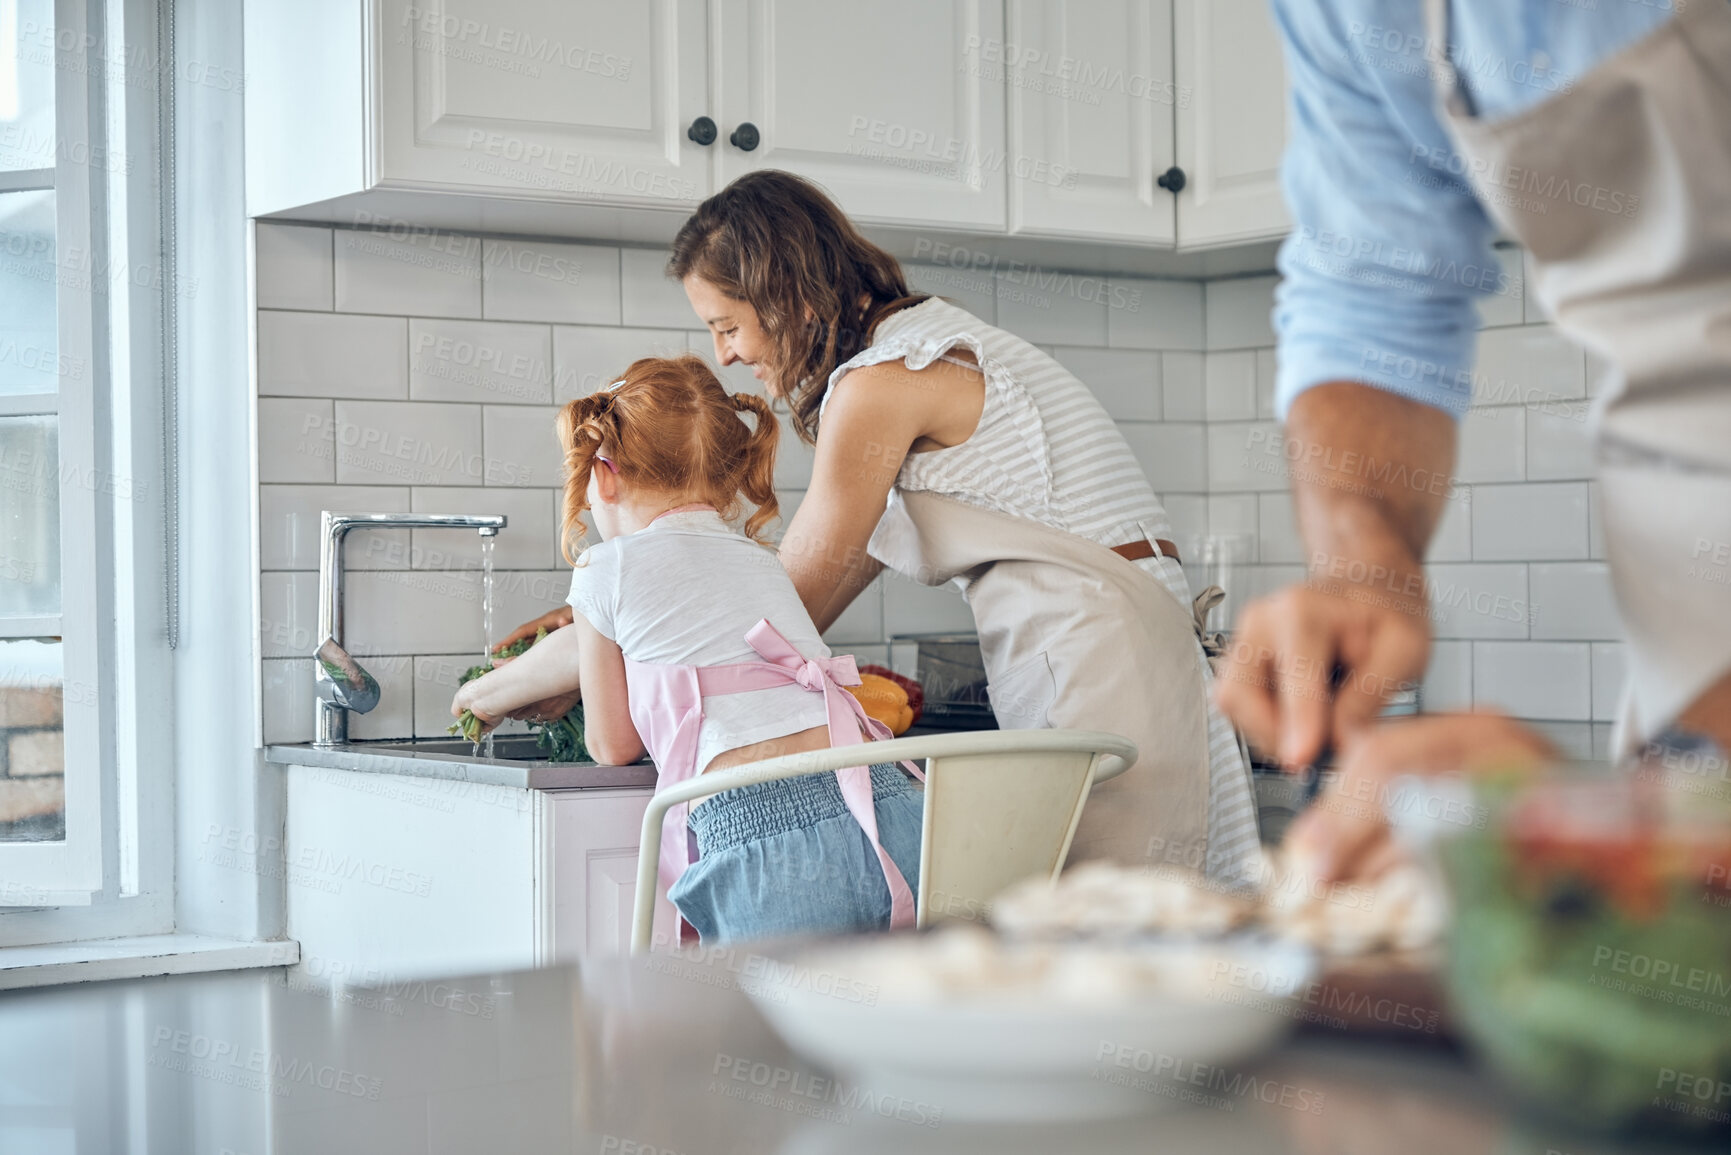 Buy stock photo Washing vegetables, cooking and food with a mother and daughter cleaning ingredients together in the kitchen. Family, help and health with a woman and girl using a sink basin to clean before a meal